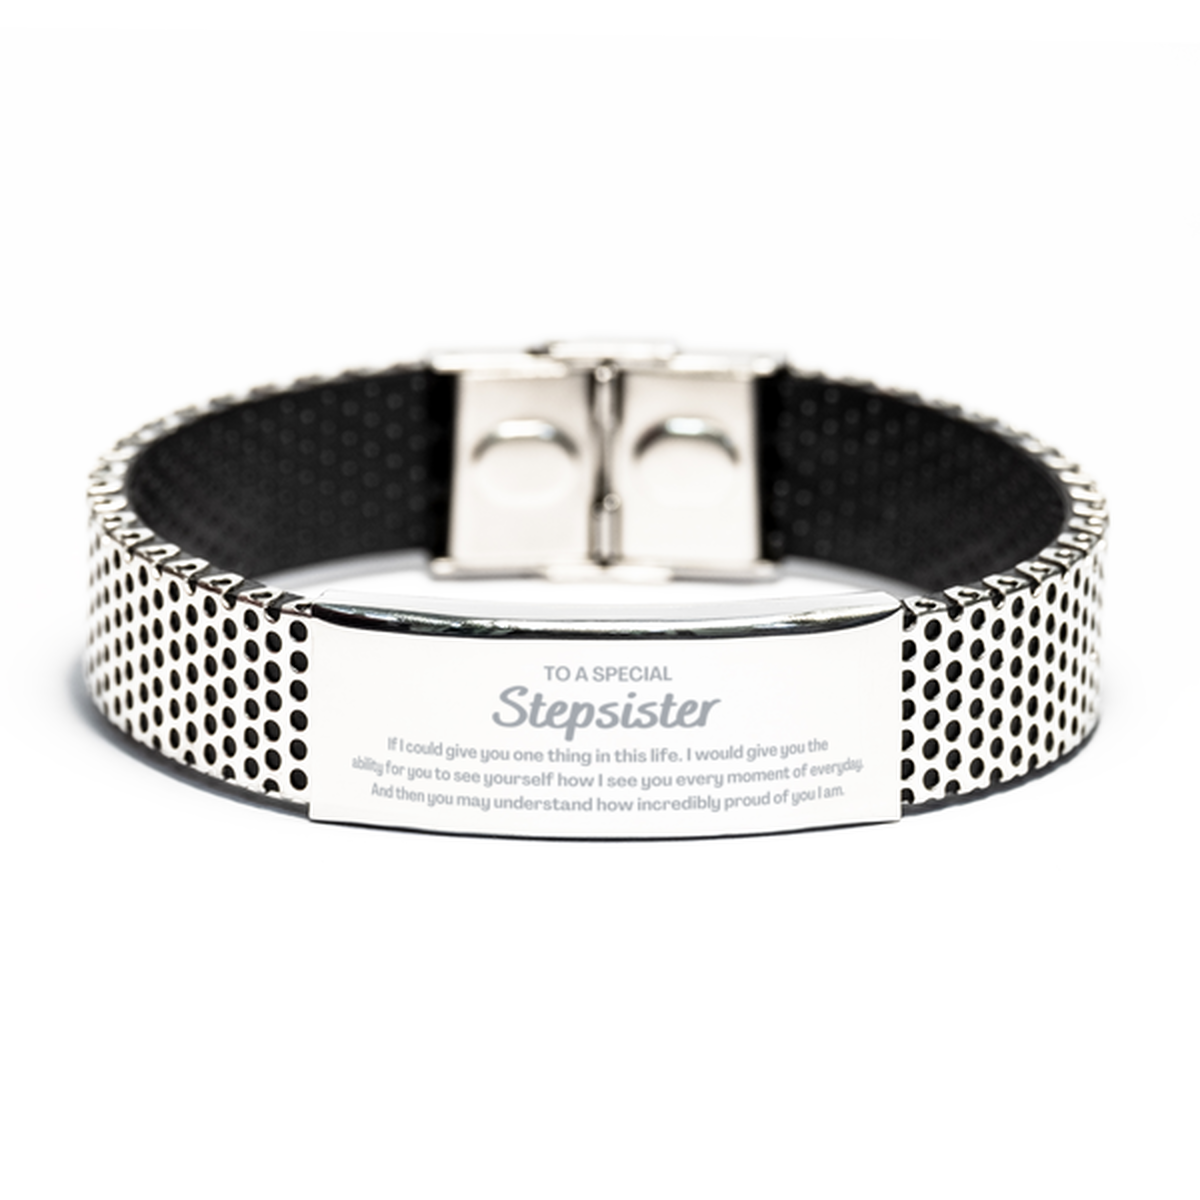 To My Stepsister Stainless Steel Bracelet, Gifts For Stepsister Engraved, Inspirational Gifts for Christmas Birthday, Epic Gifts for Stepsister To A Special Stepsister how incredibly proud of you I am